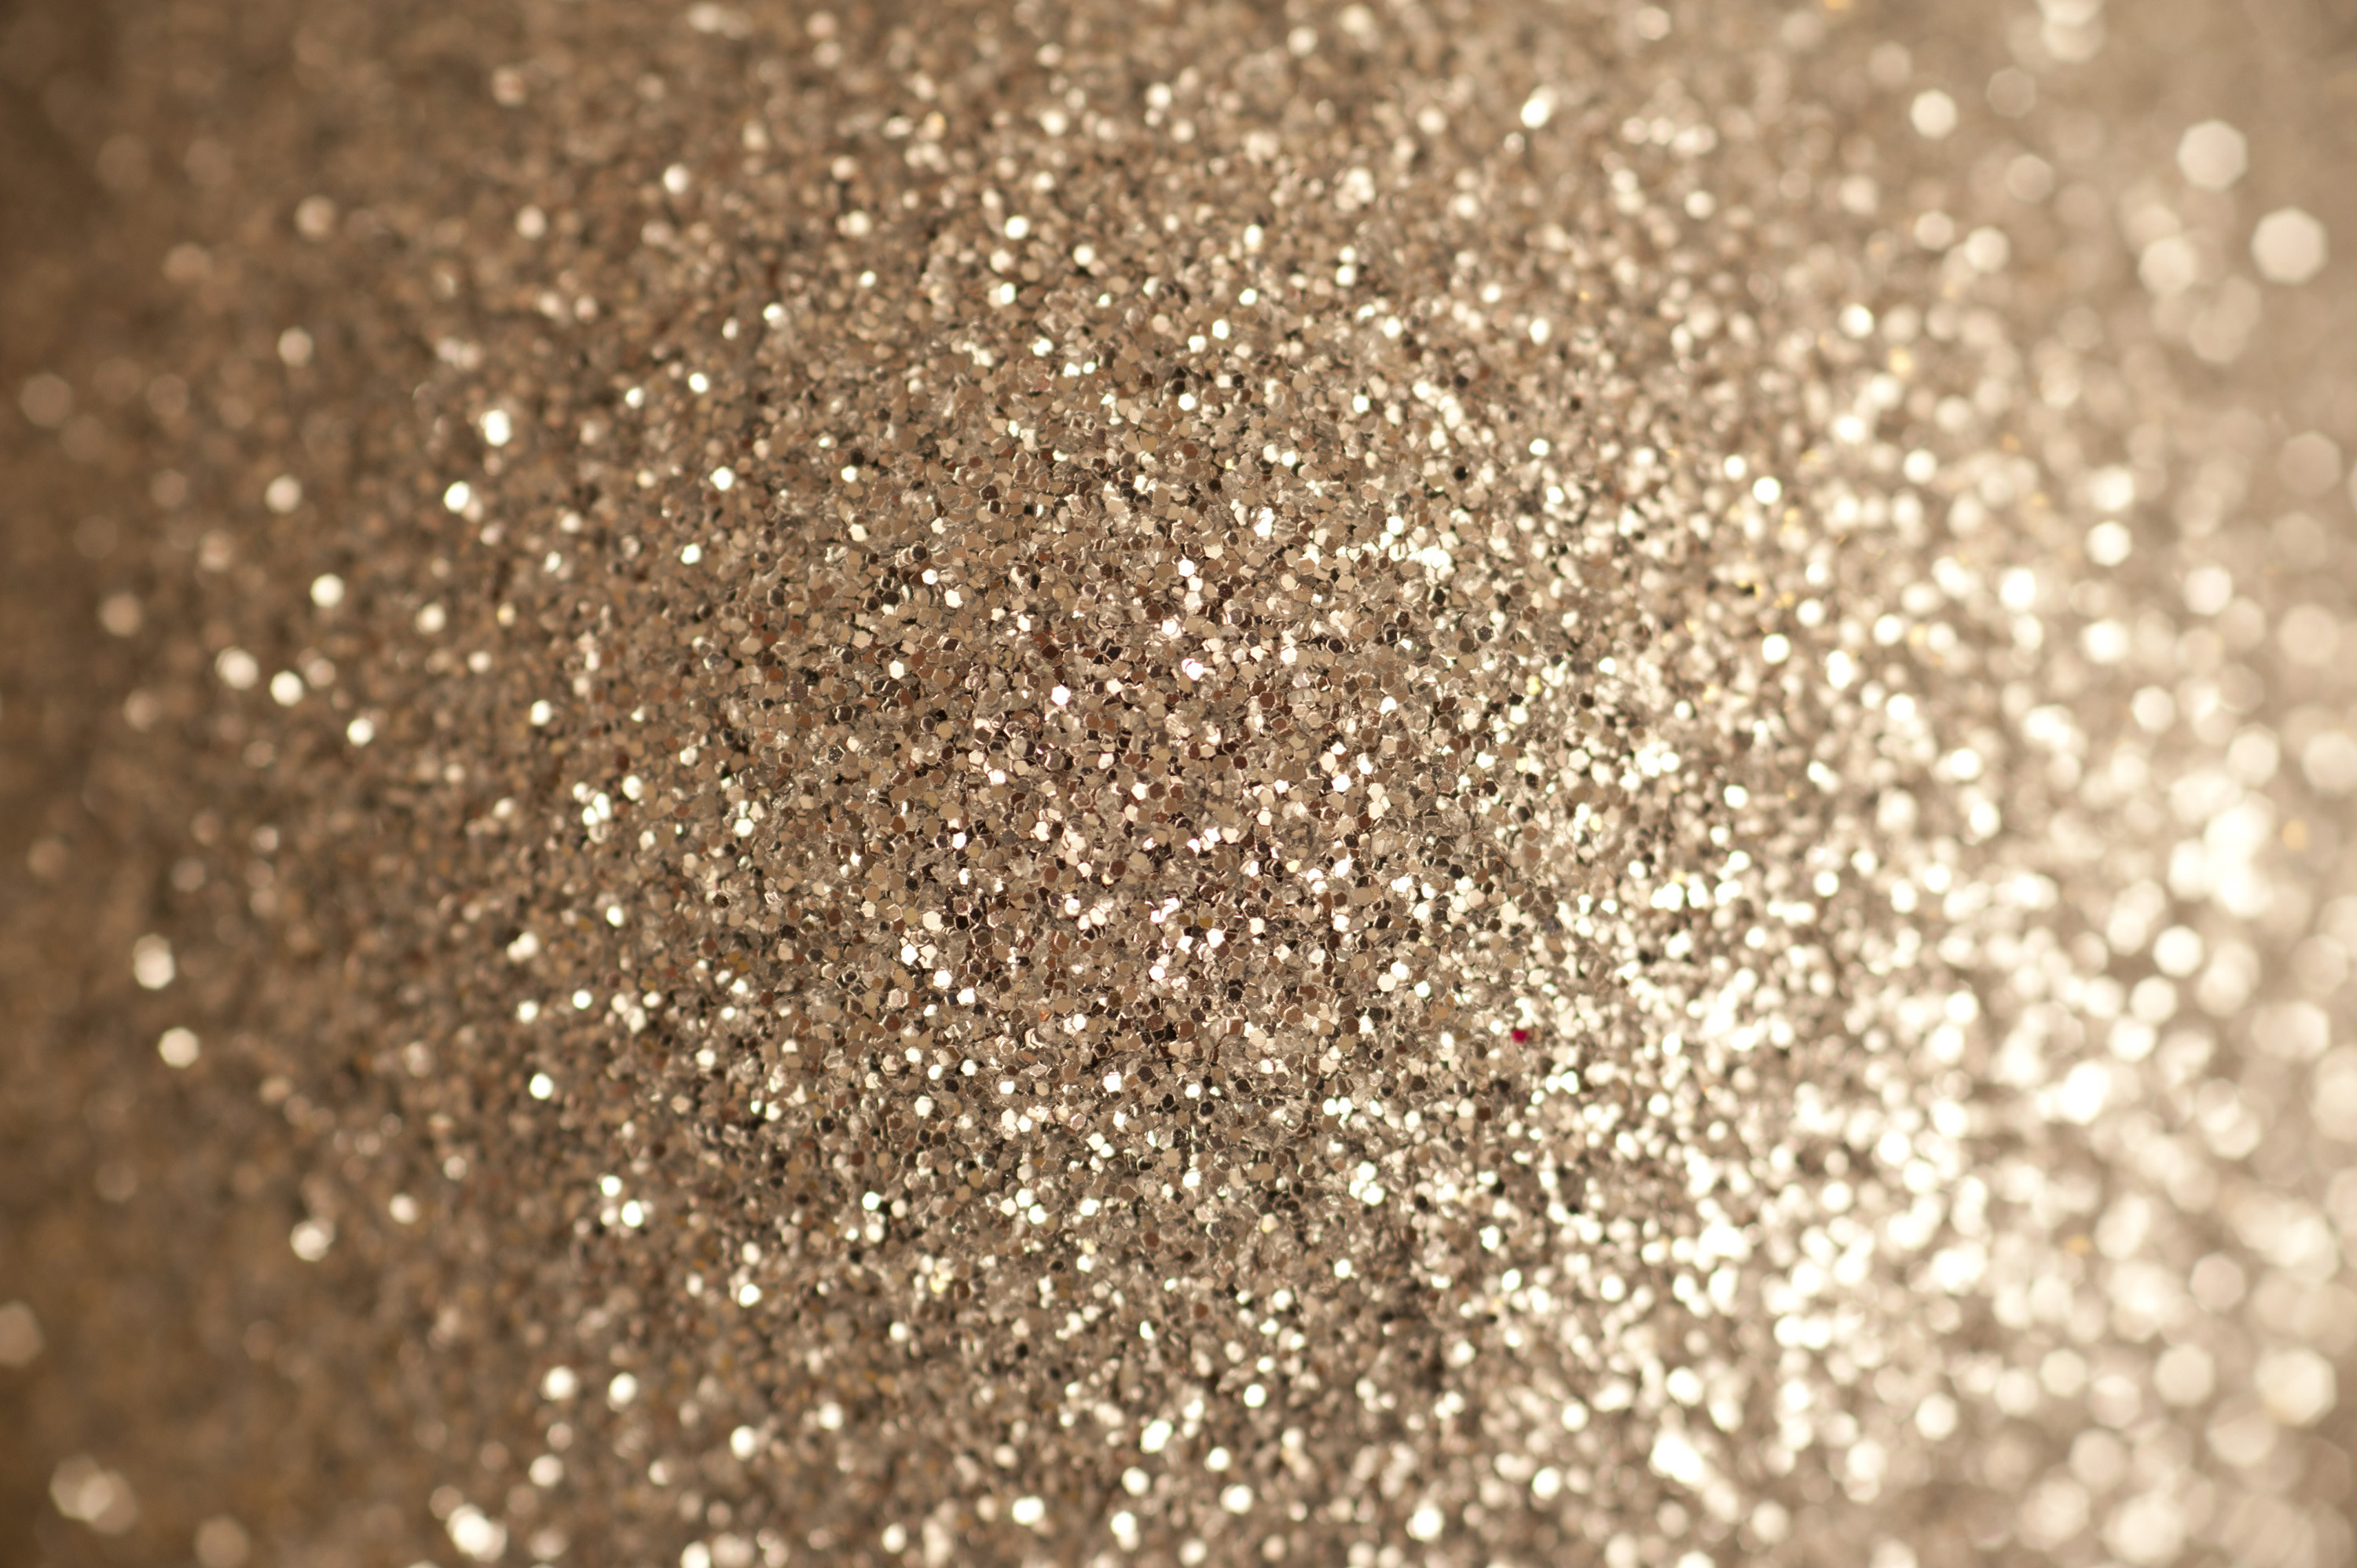 3000x1996 Full Frame Abstract Background of Festive Gold Glitter, Framed with Soft  Diffuse Focus Toward Outer